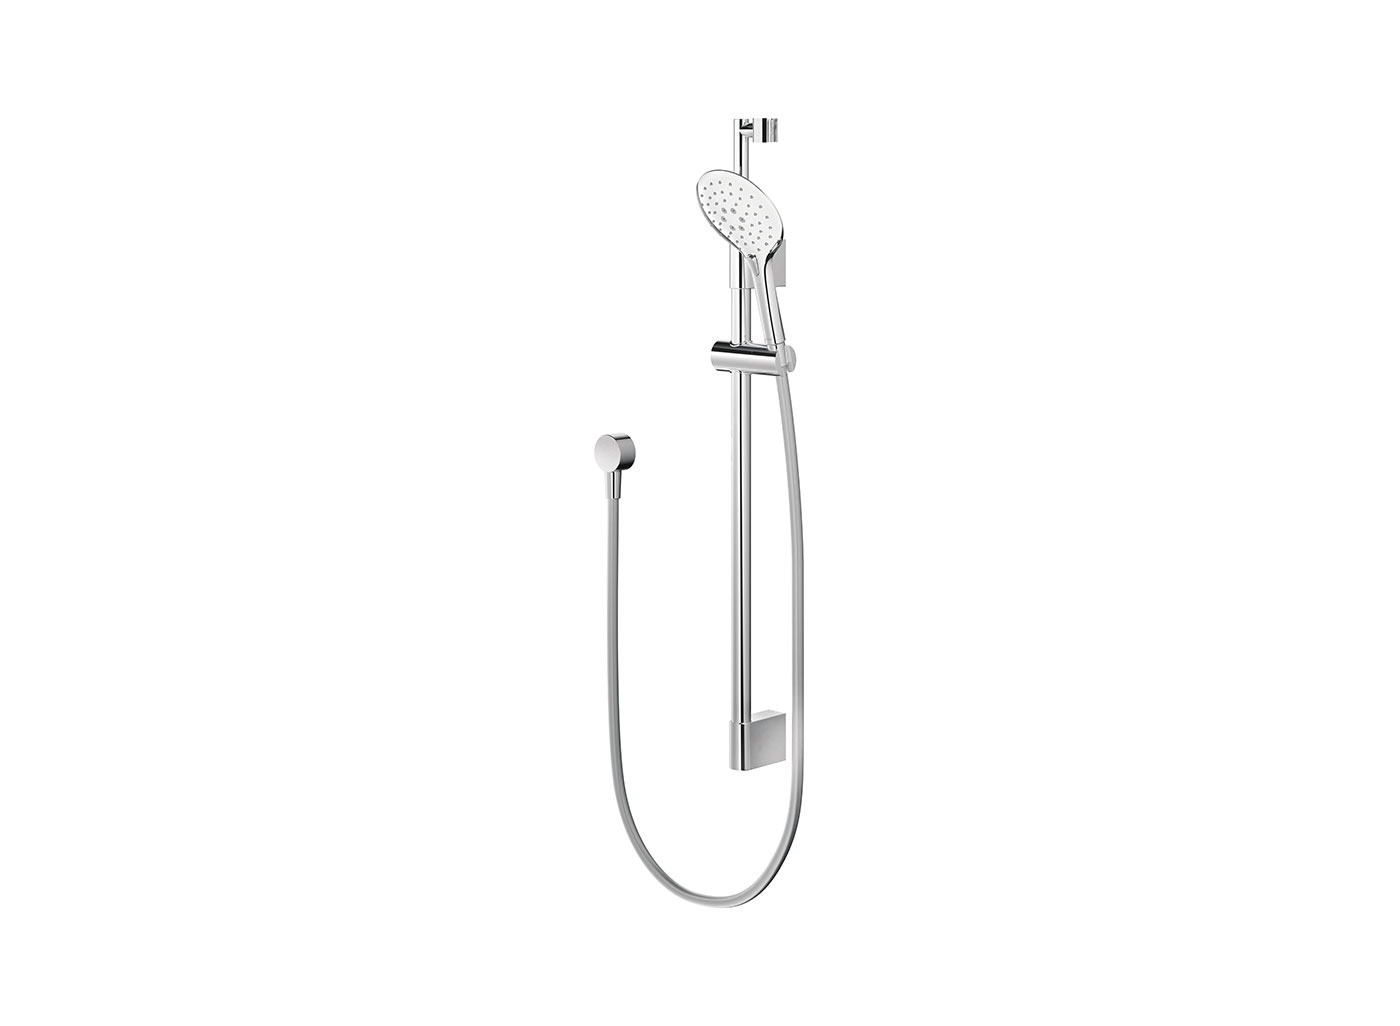 The Easy-Click range allows a seamless transition between shower sprays with the simple click of a button and features a design that marries sought on-trend minimalism and height adjustability with its telescopic rail. A perfect combination to enhance and customize everyone's shower experience.